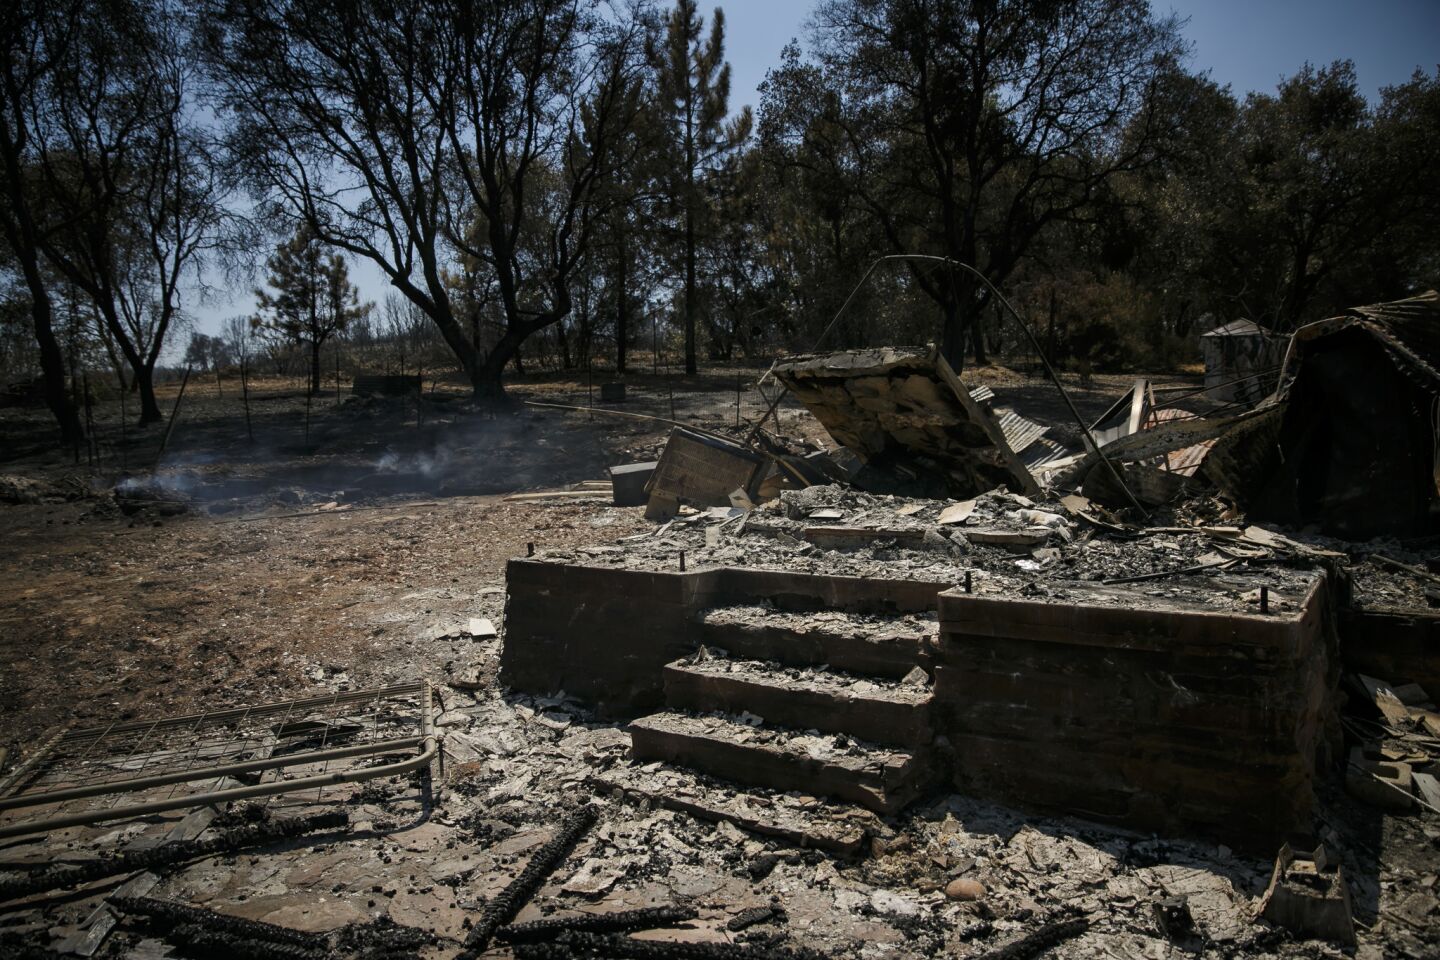 A home burned down by the Detwiler fire in Mariposa, Calif.